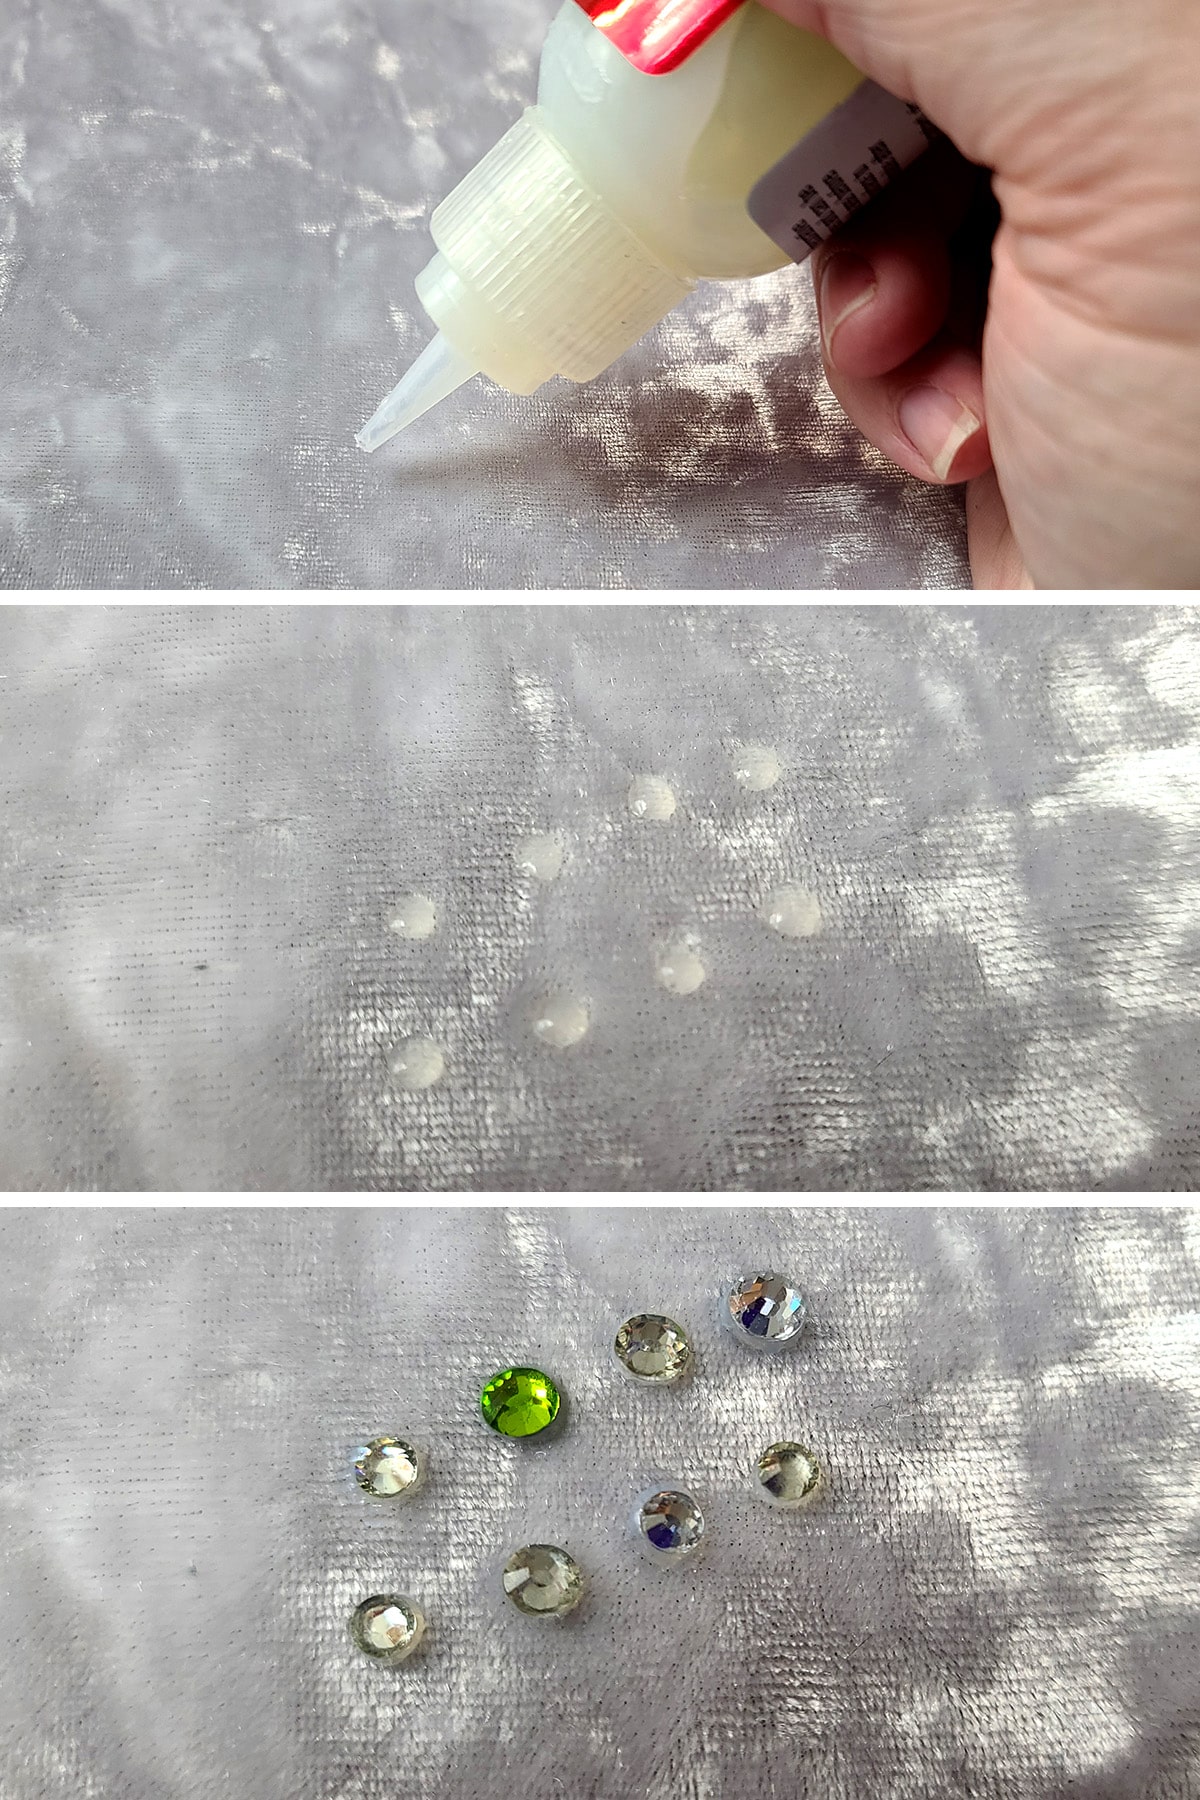 A 3 part compilation image showing glue being piped onto white crushed velvet, and then crystals being applied.